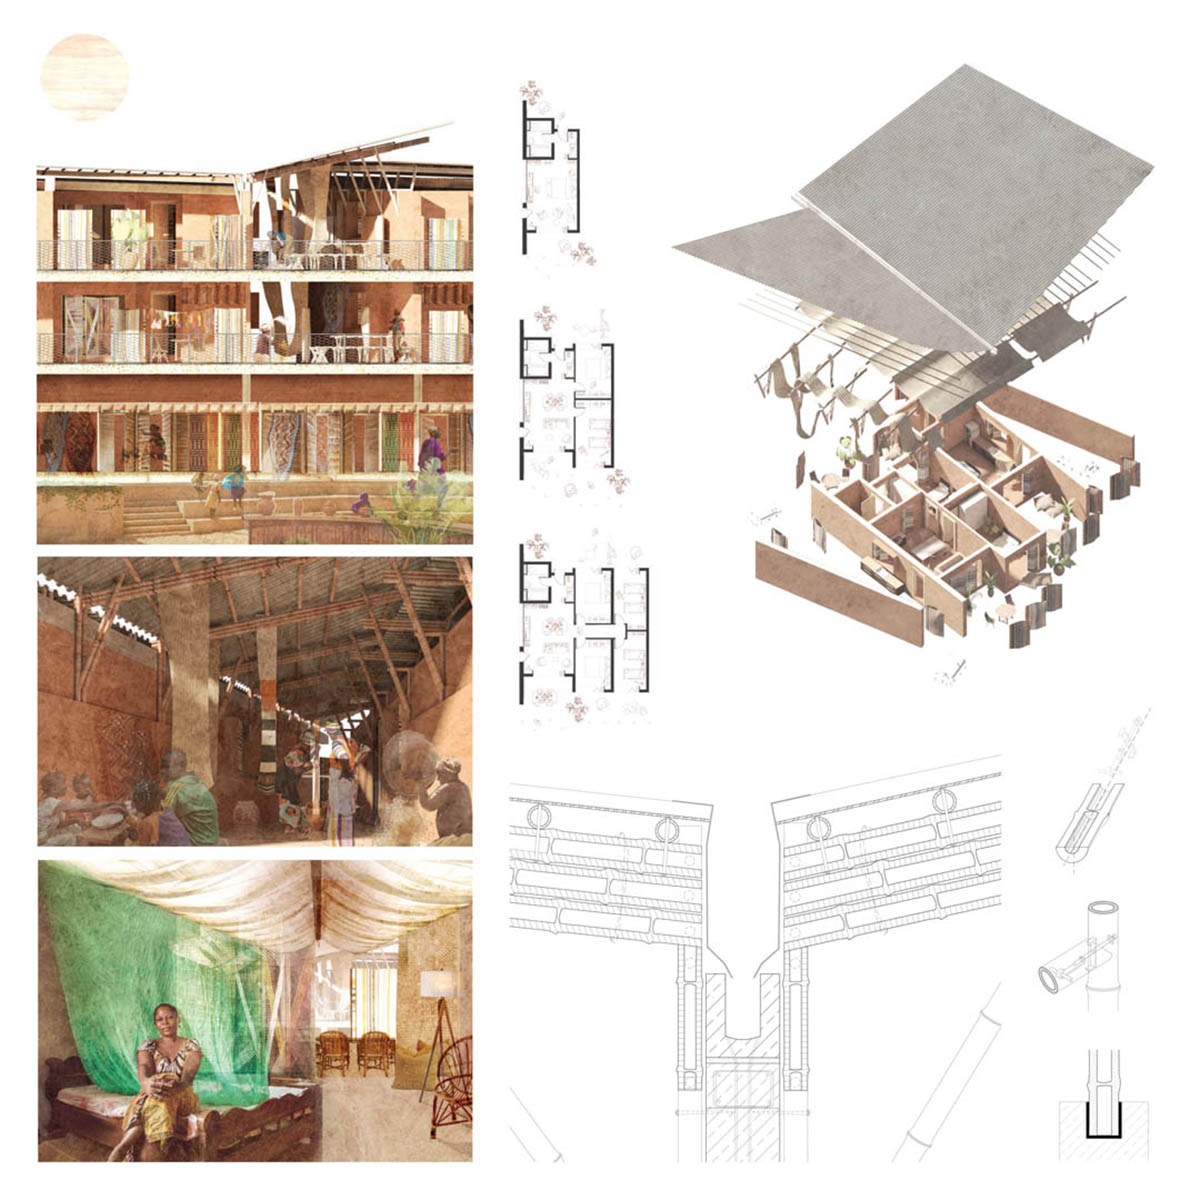 award winning architectural thesis topics